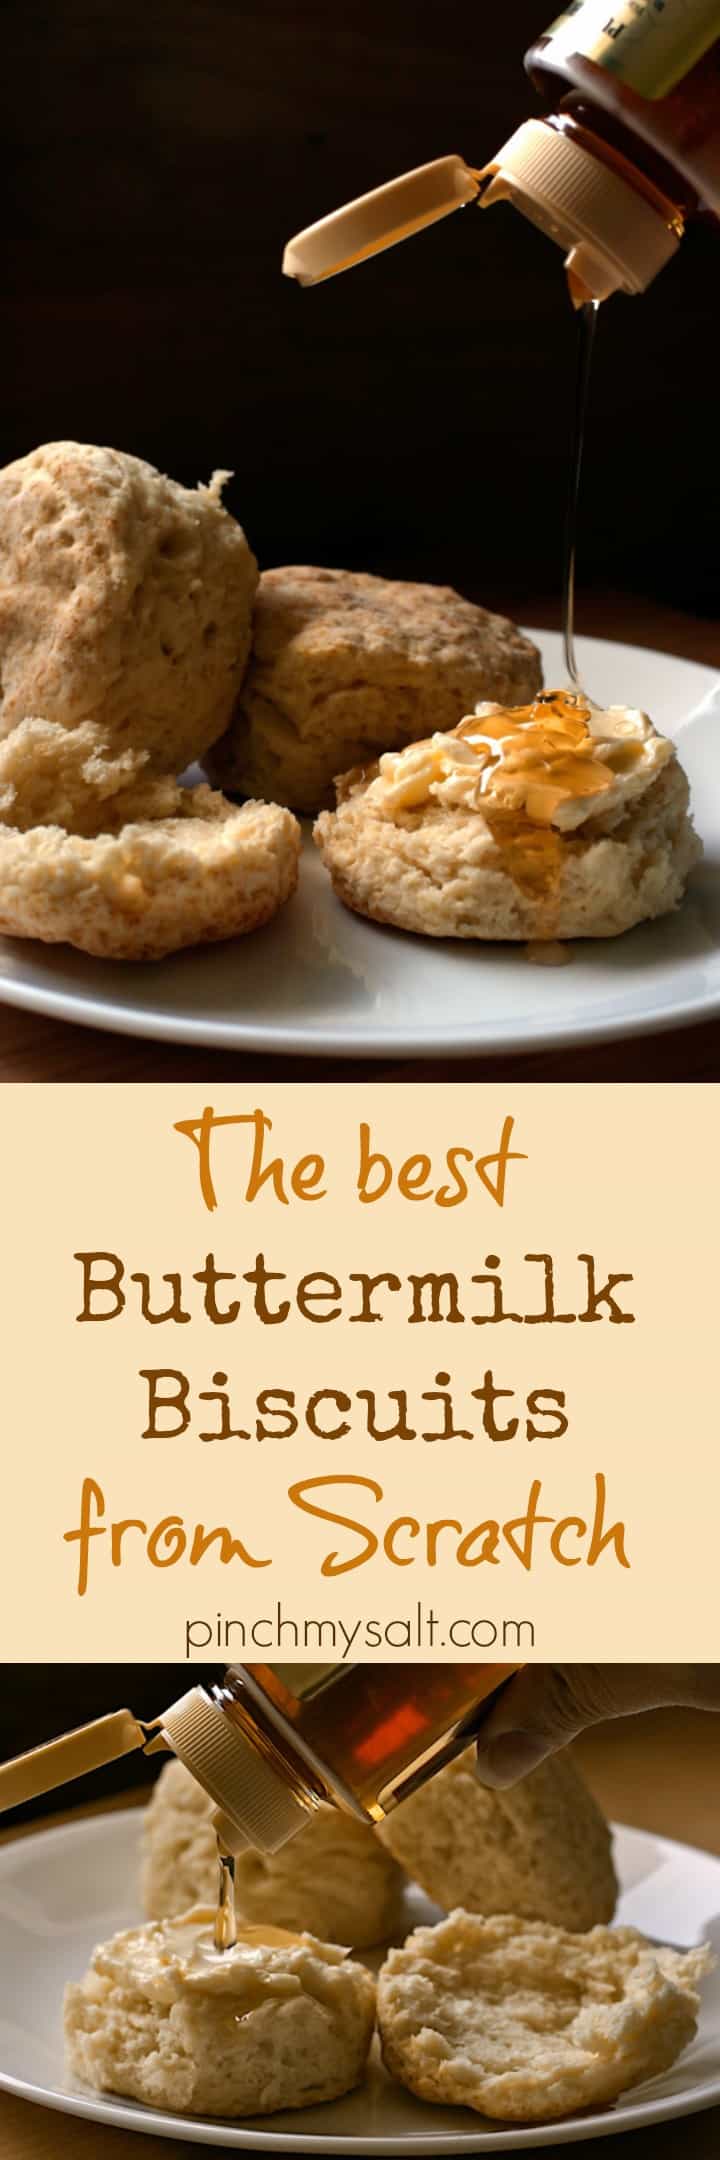 How to make the BEST buttermilk biscuits from pinchmysalt.com